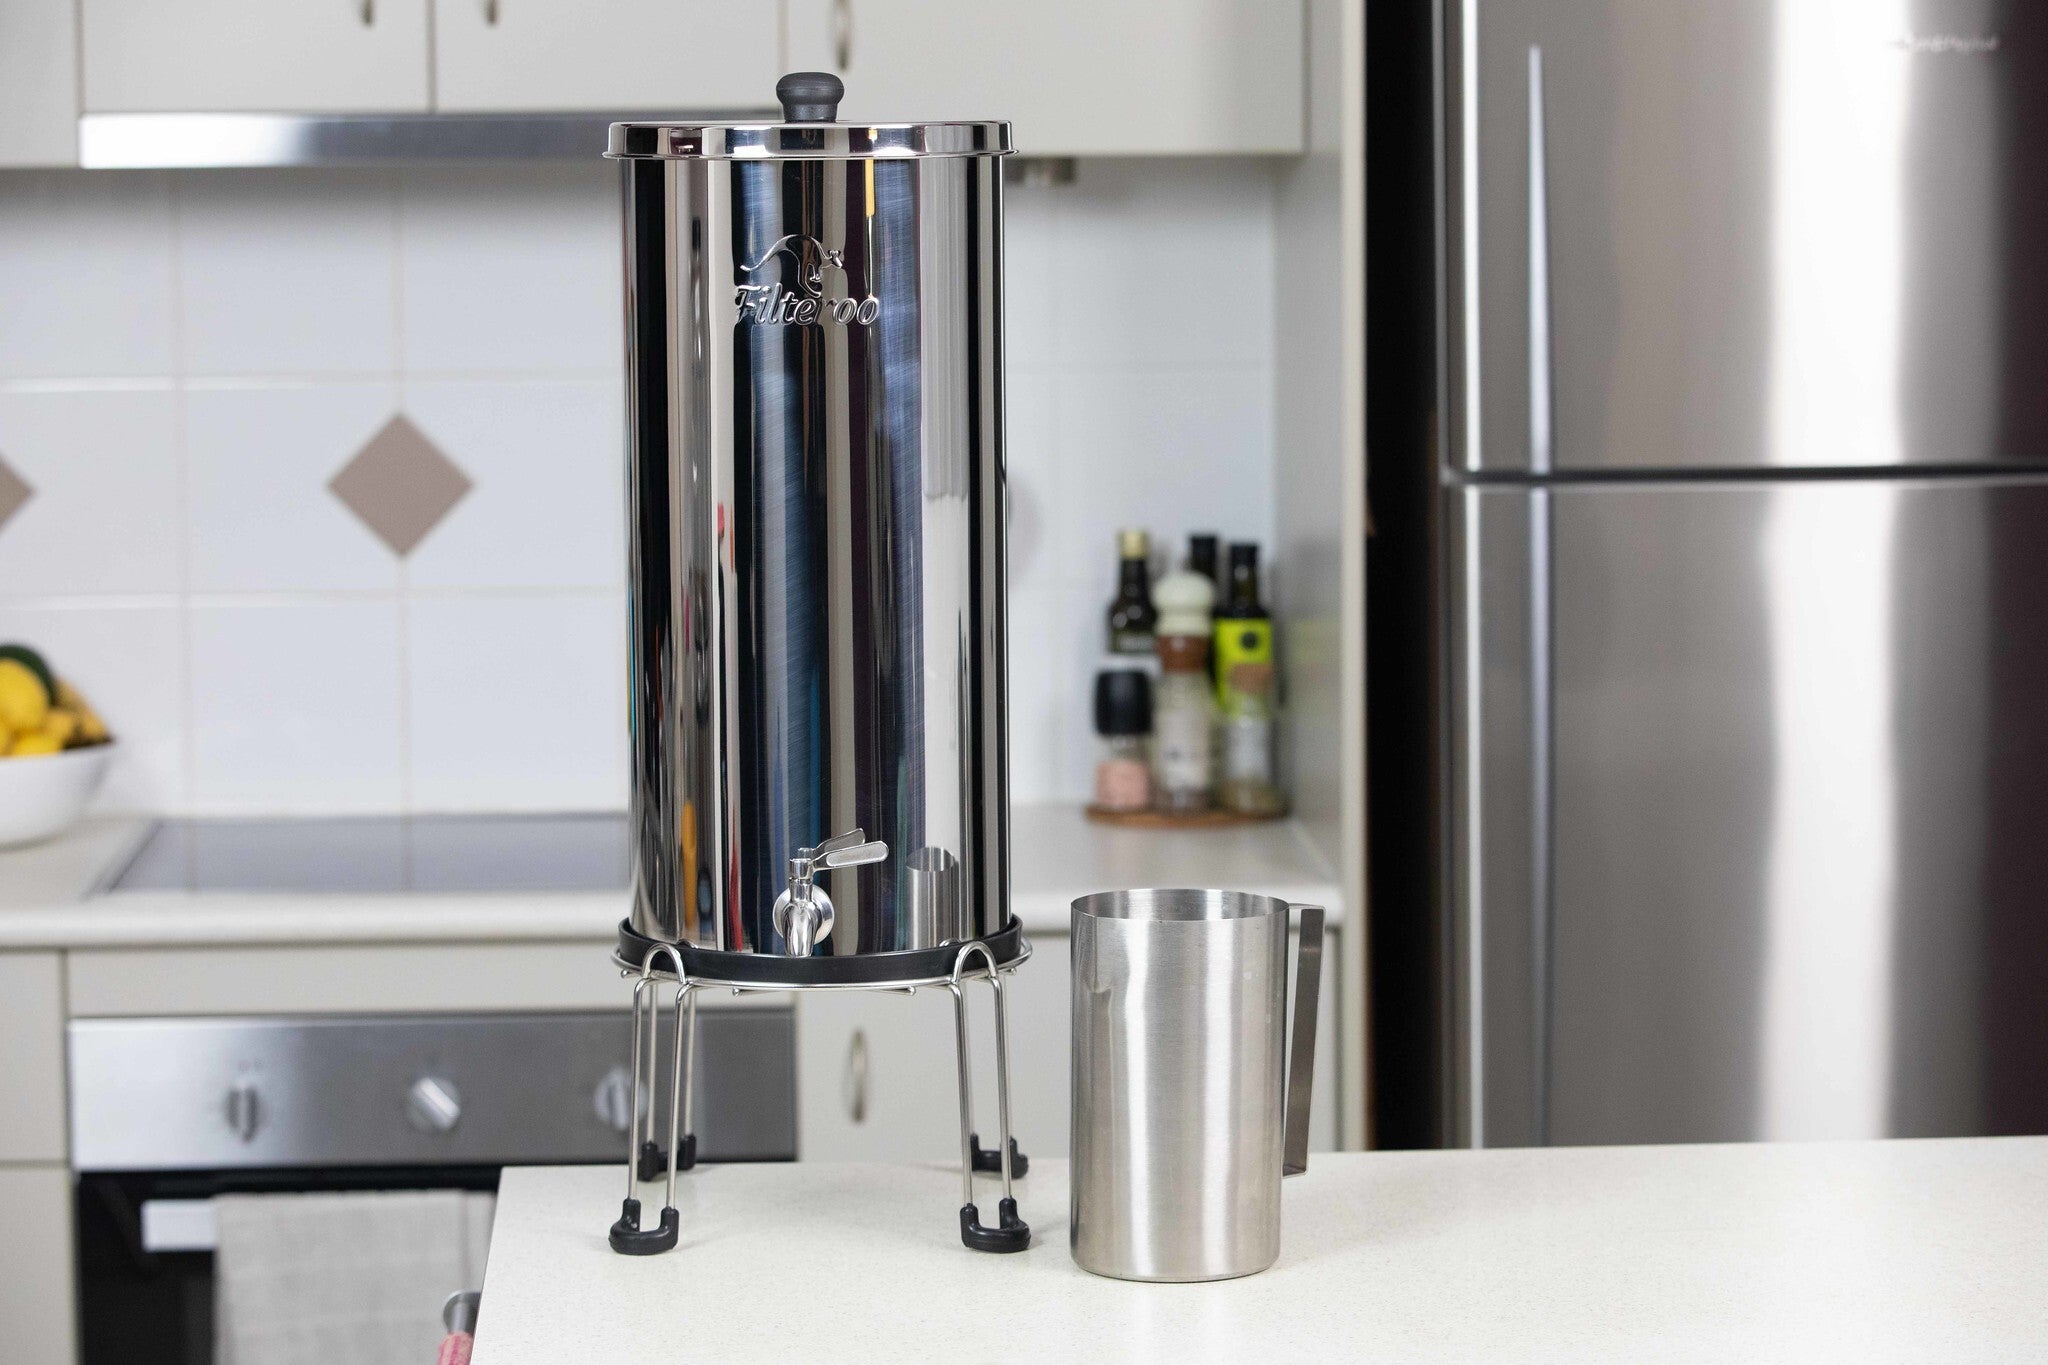 Filteroo® Superoo 16L Stainless Steel Gravity Water Filter